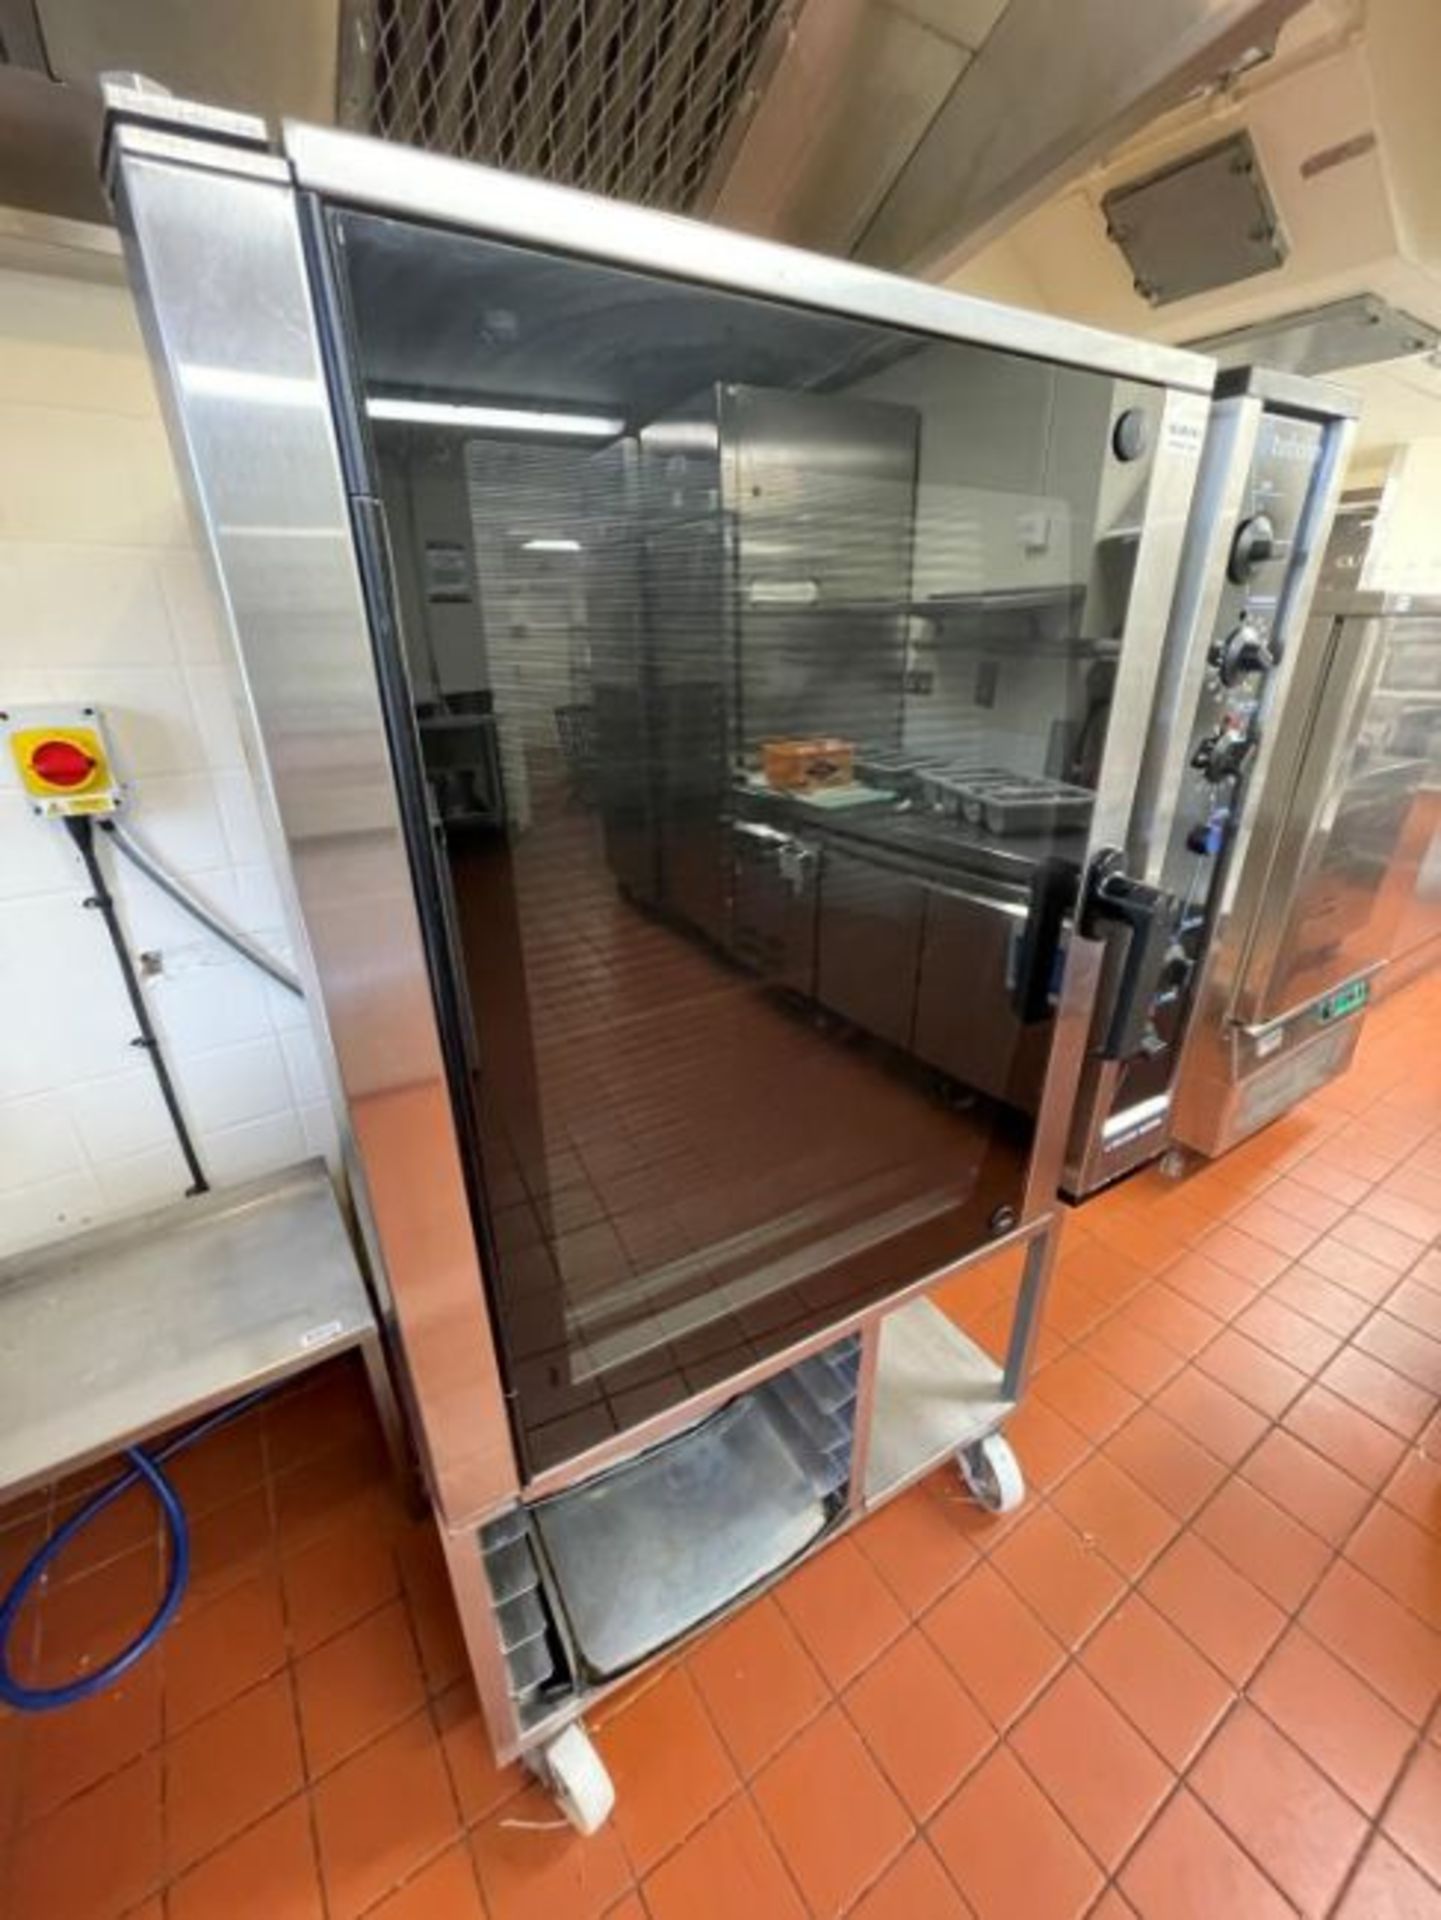 1 x Blue Seal Moffat Turbofan E35 Convection Oven With Stand - Model E35-30-453 - 400v Power - - Image 8 of 16